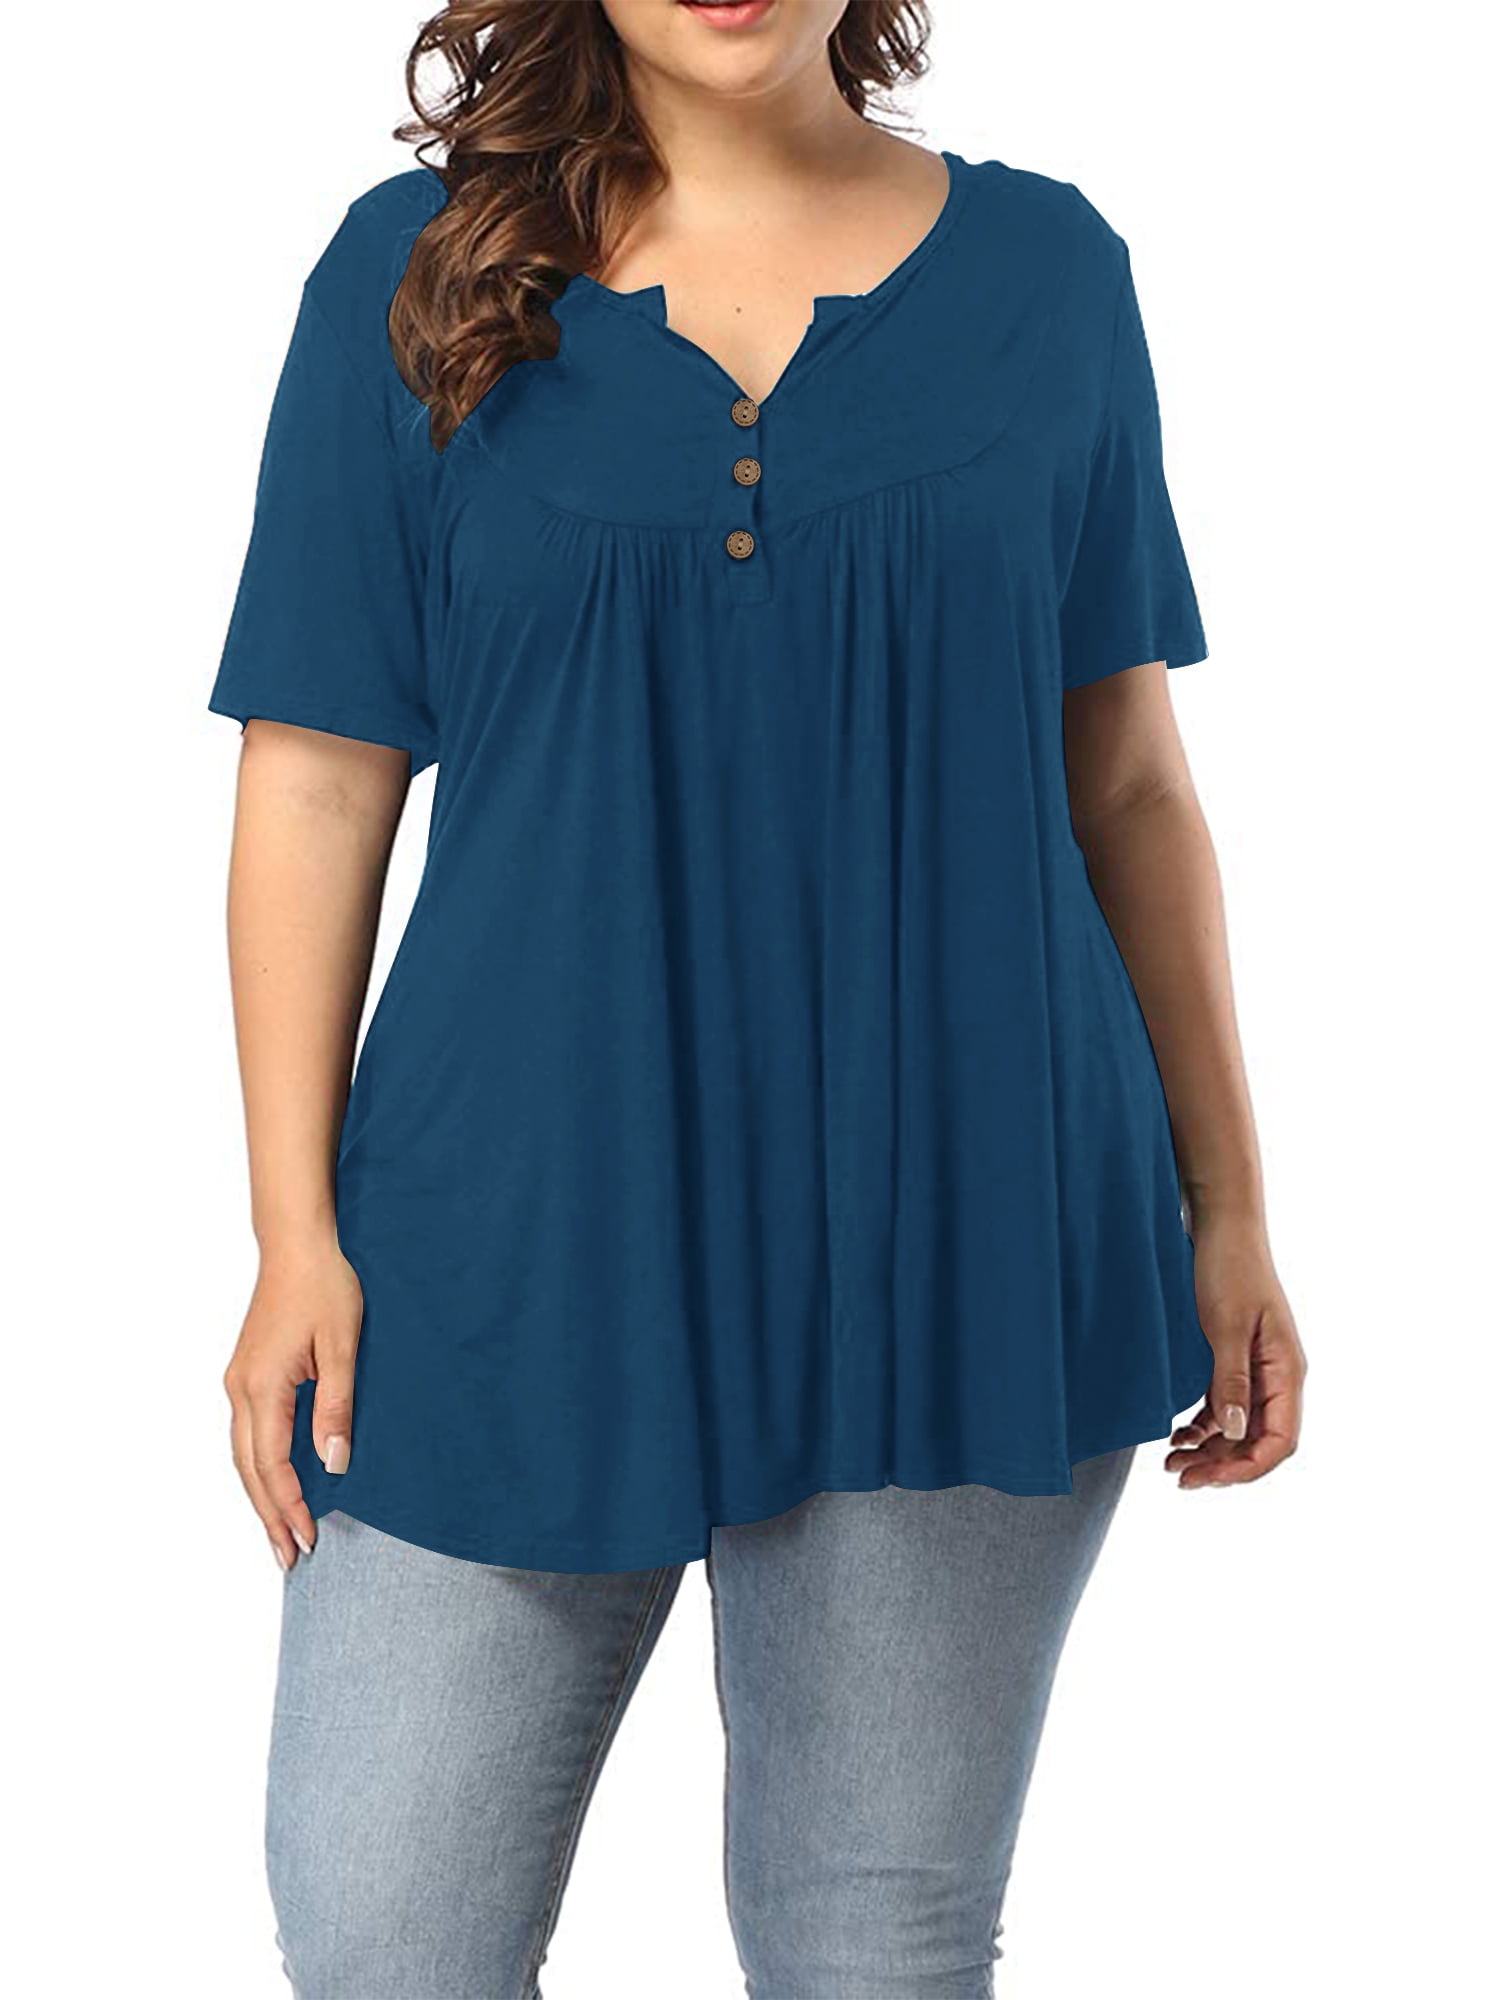 Women's Plus Size Henley V Neck Button up Tunic Tops Casual Short Blouse Shirts -